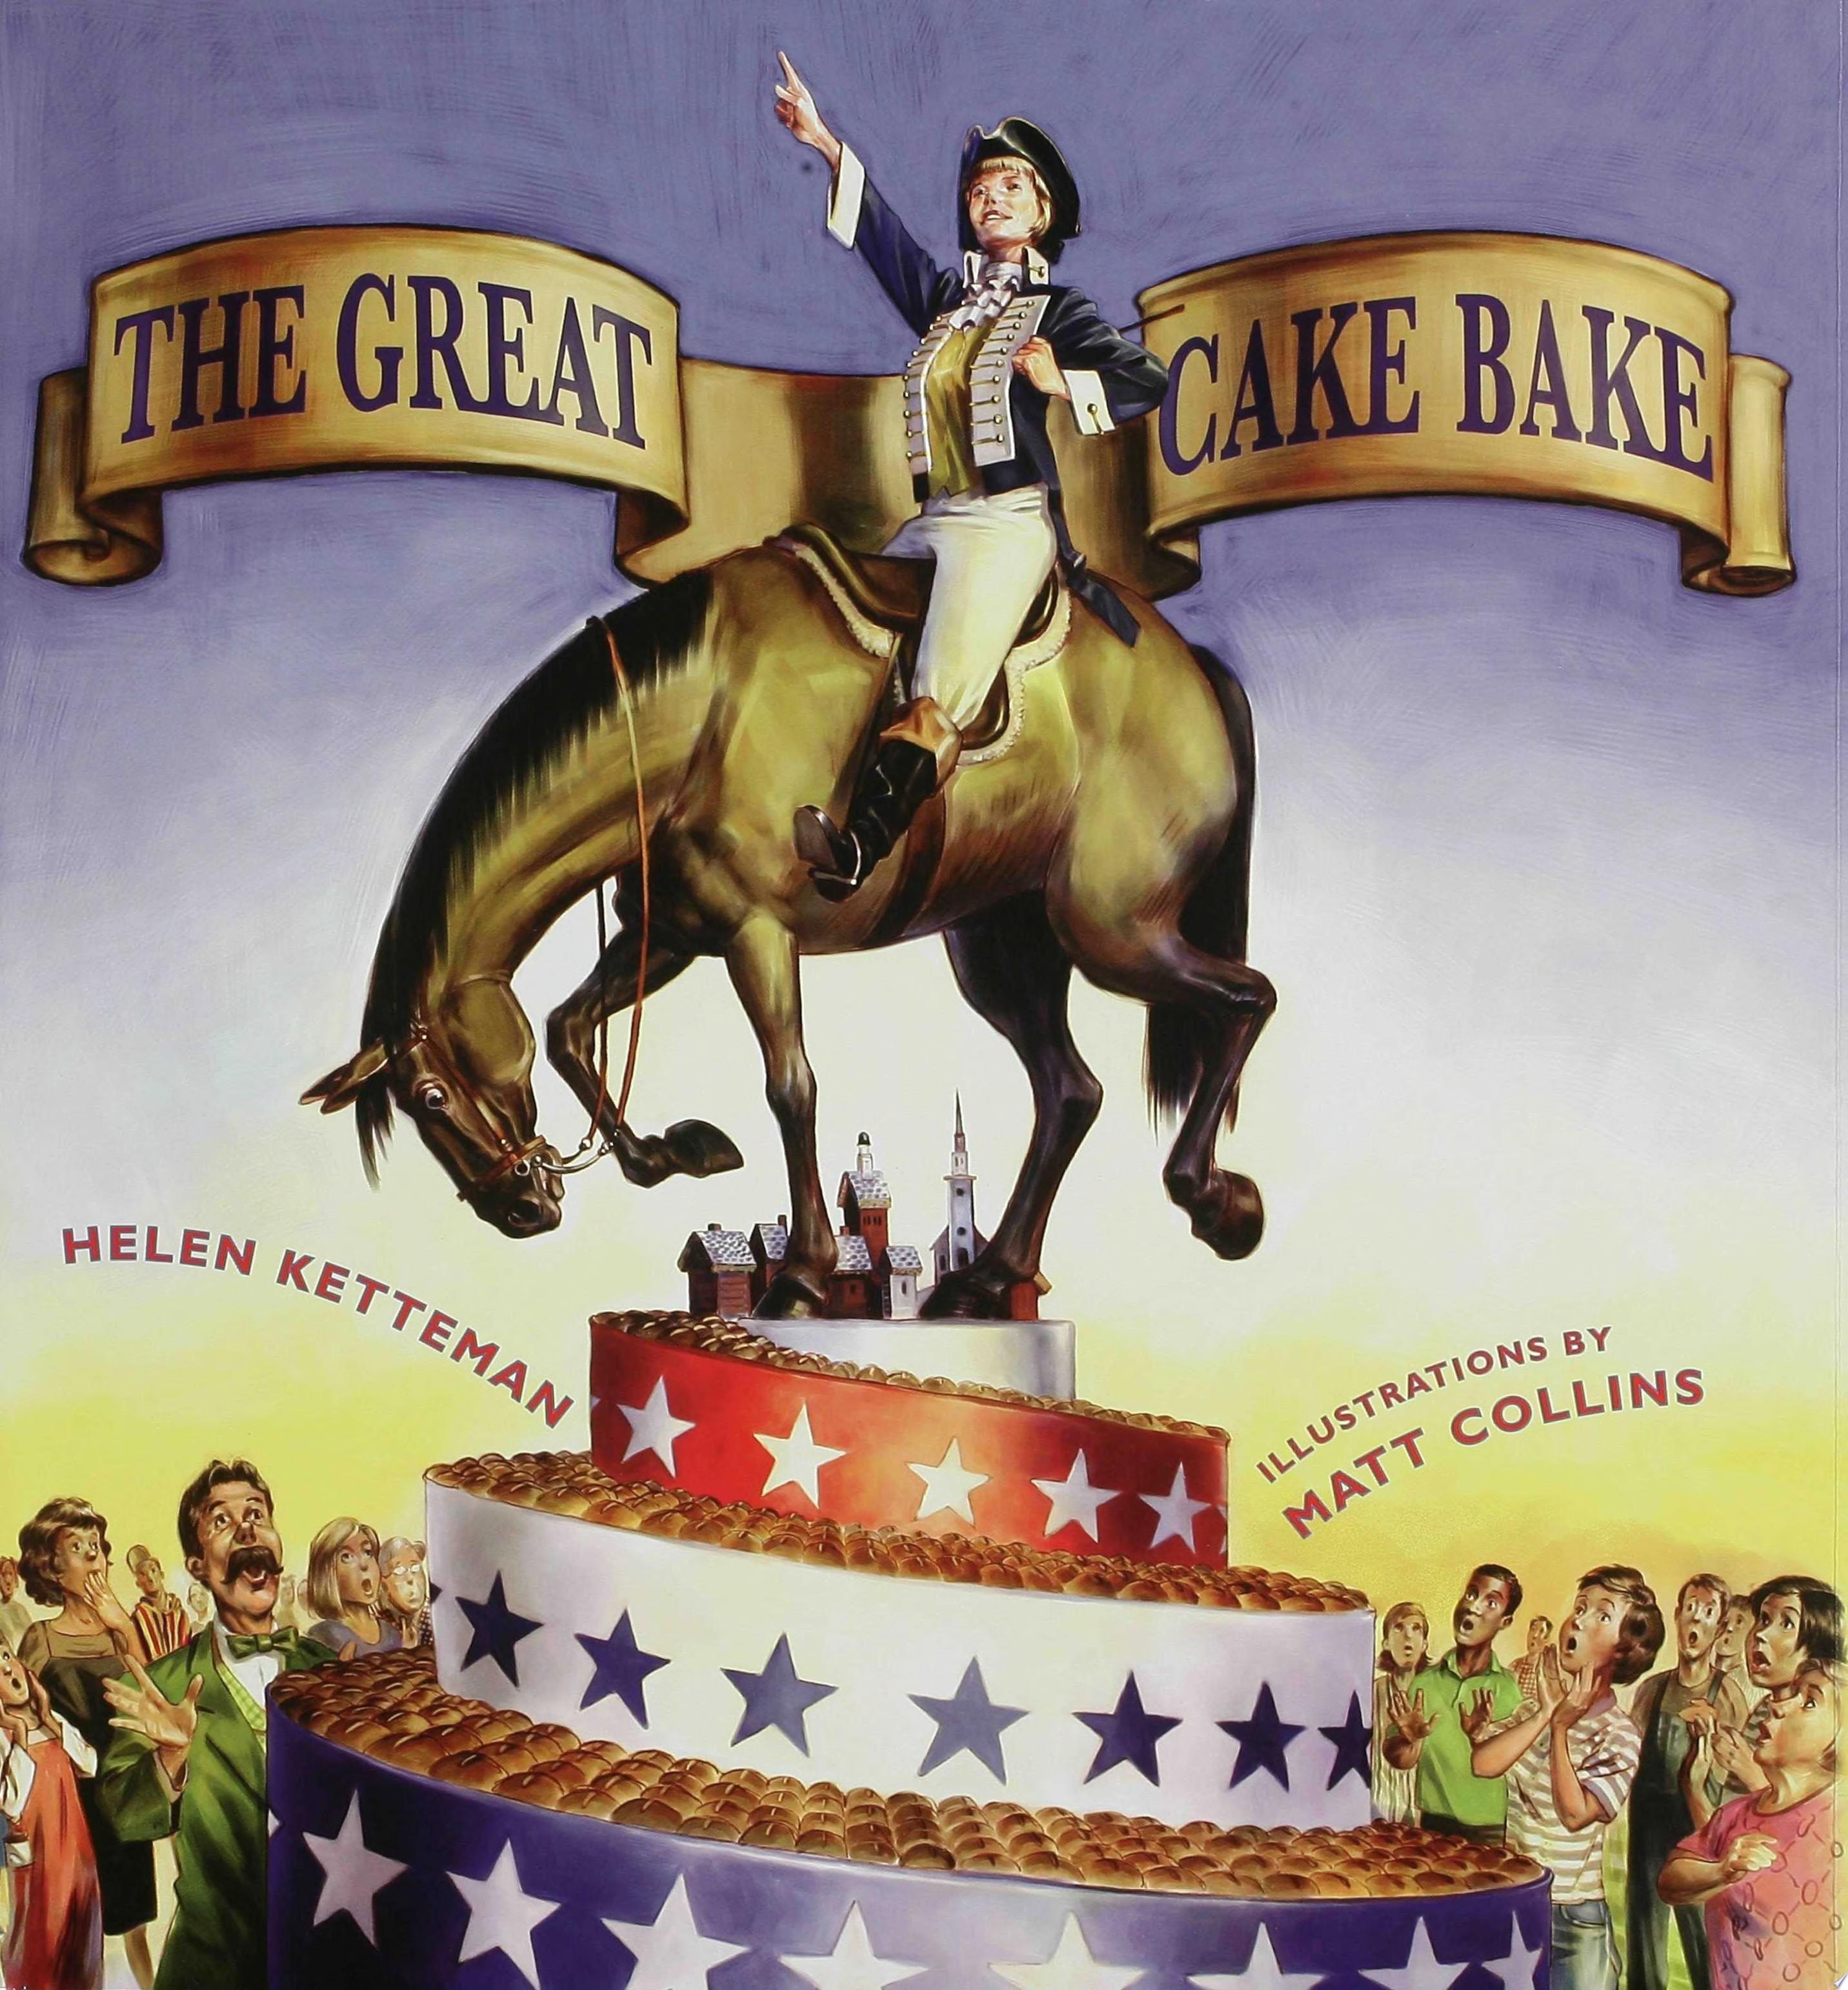 Image for "The Great Cake Bake"